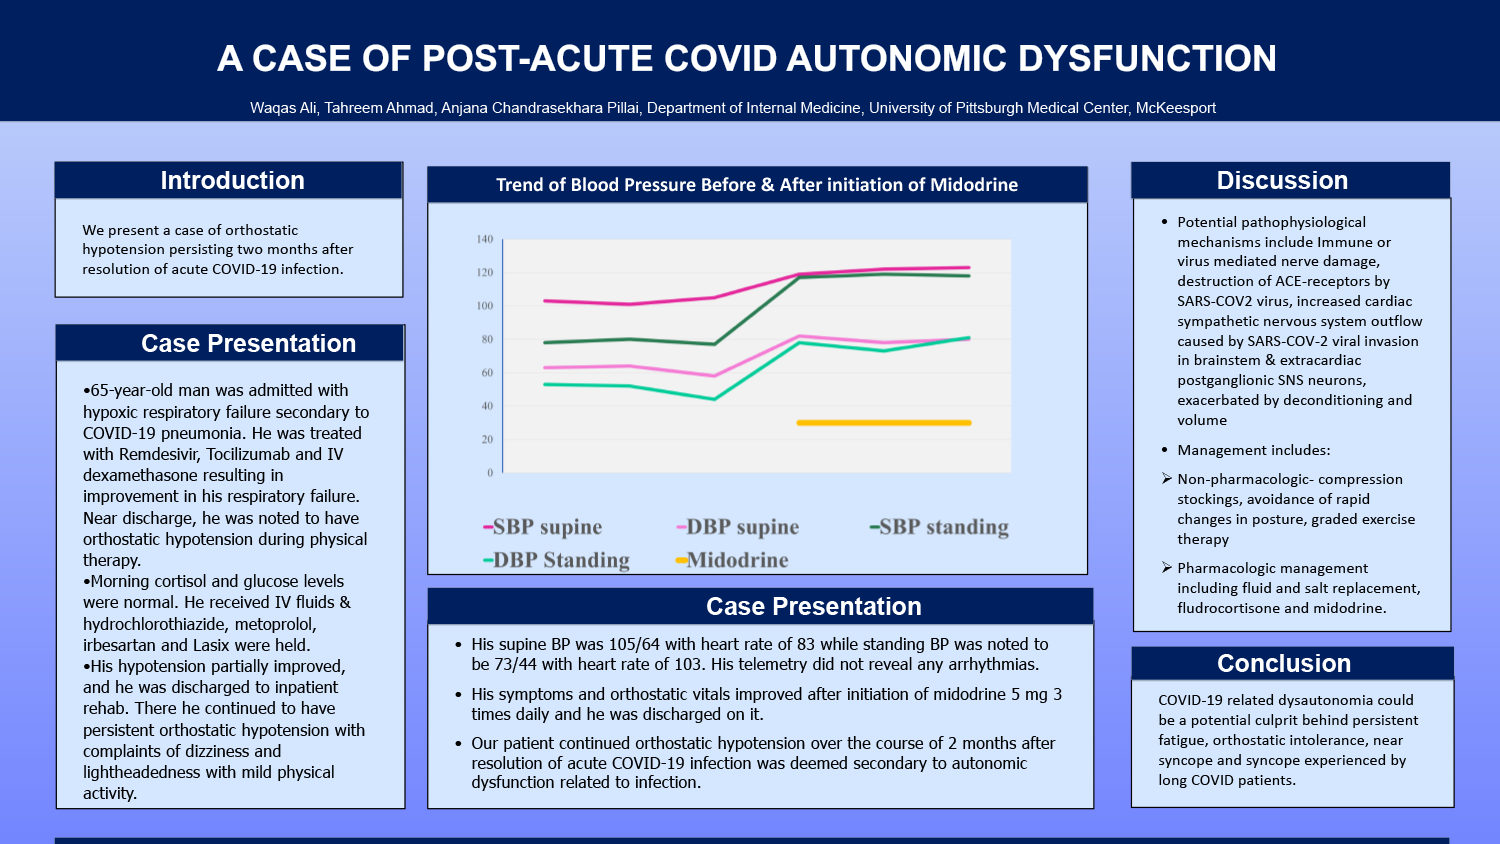 Waqas Ali - PAW-49-Persistent-Orthostatic-Hypotension-After-Acute COVID-19-Infection